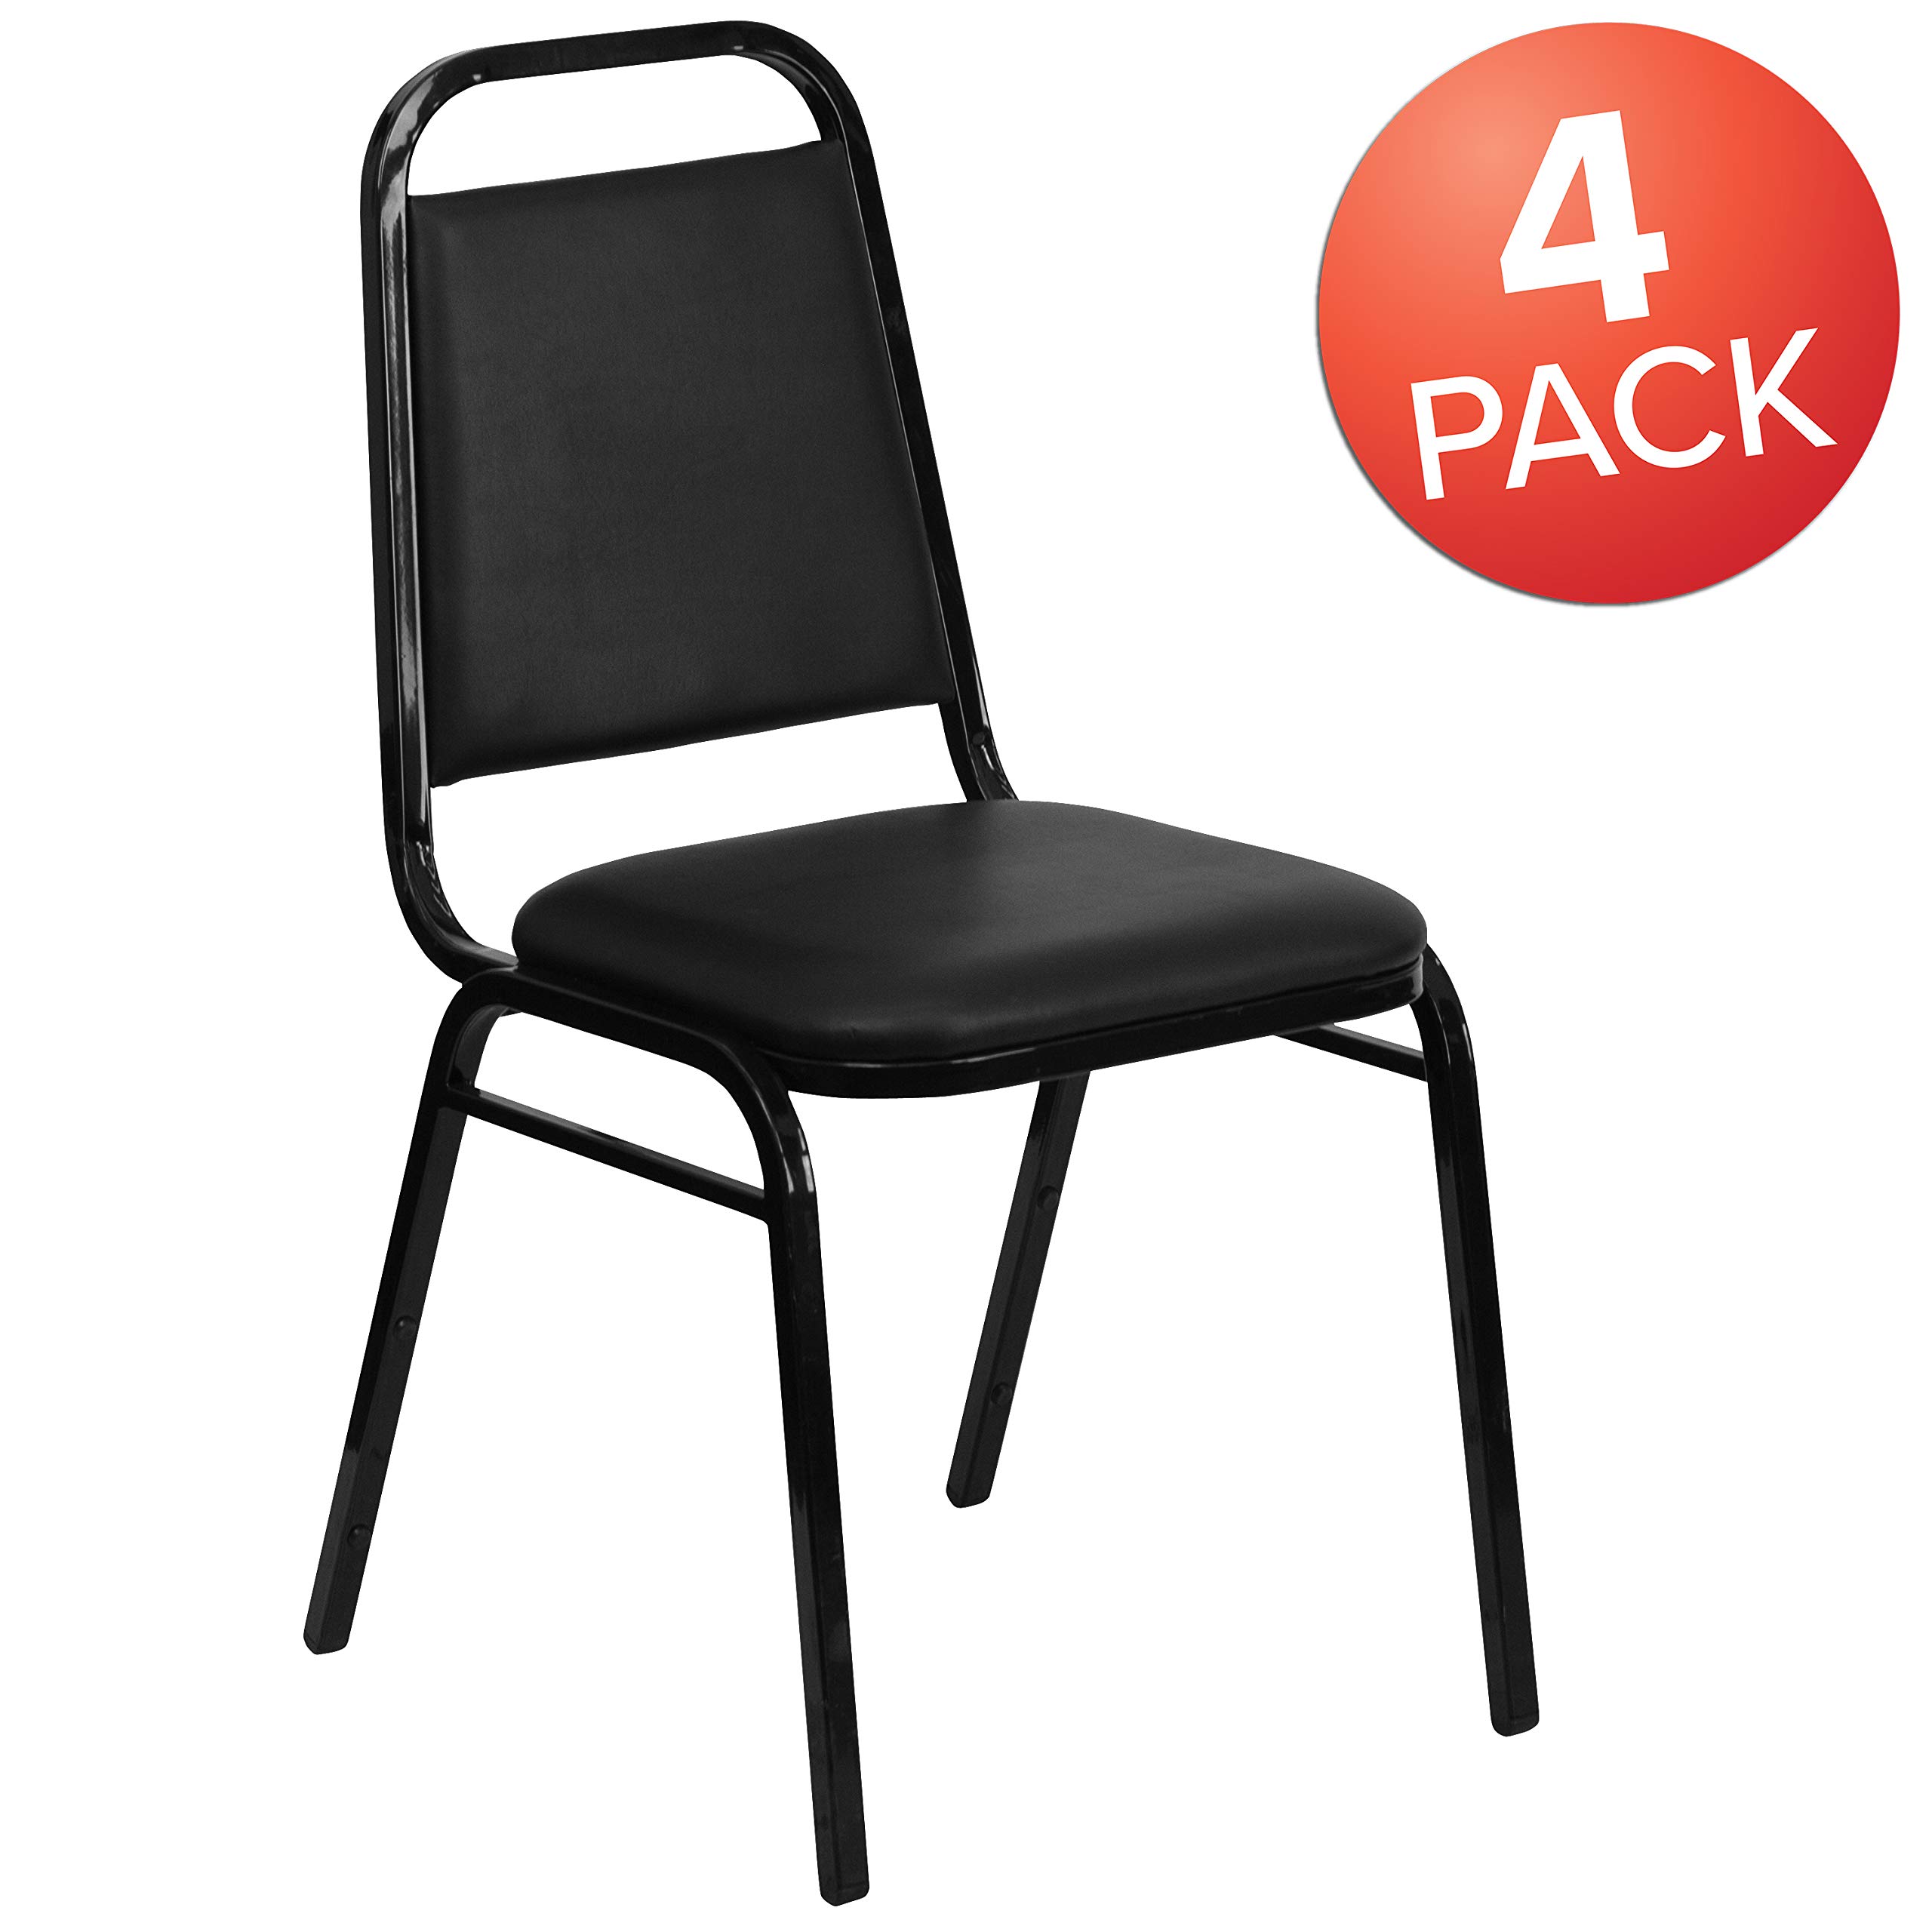 BizChair 4 Pack Trapezoidal Back Stacking Banquet Chair in Black Vinyl with 1.5" Thick Seat